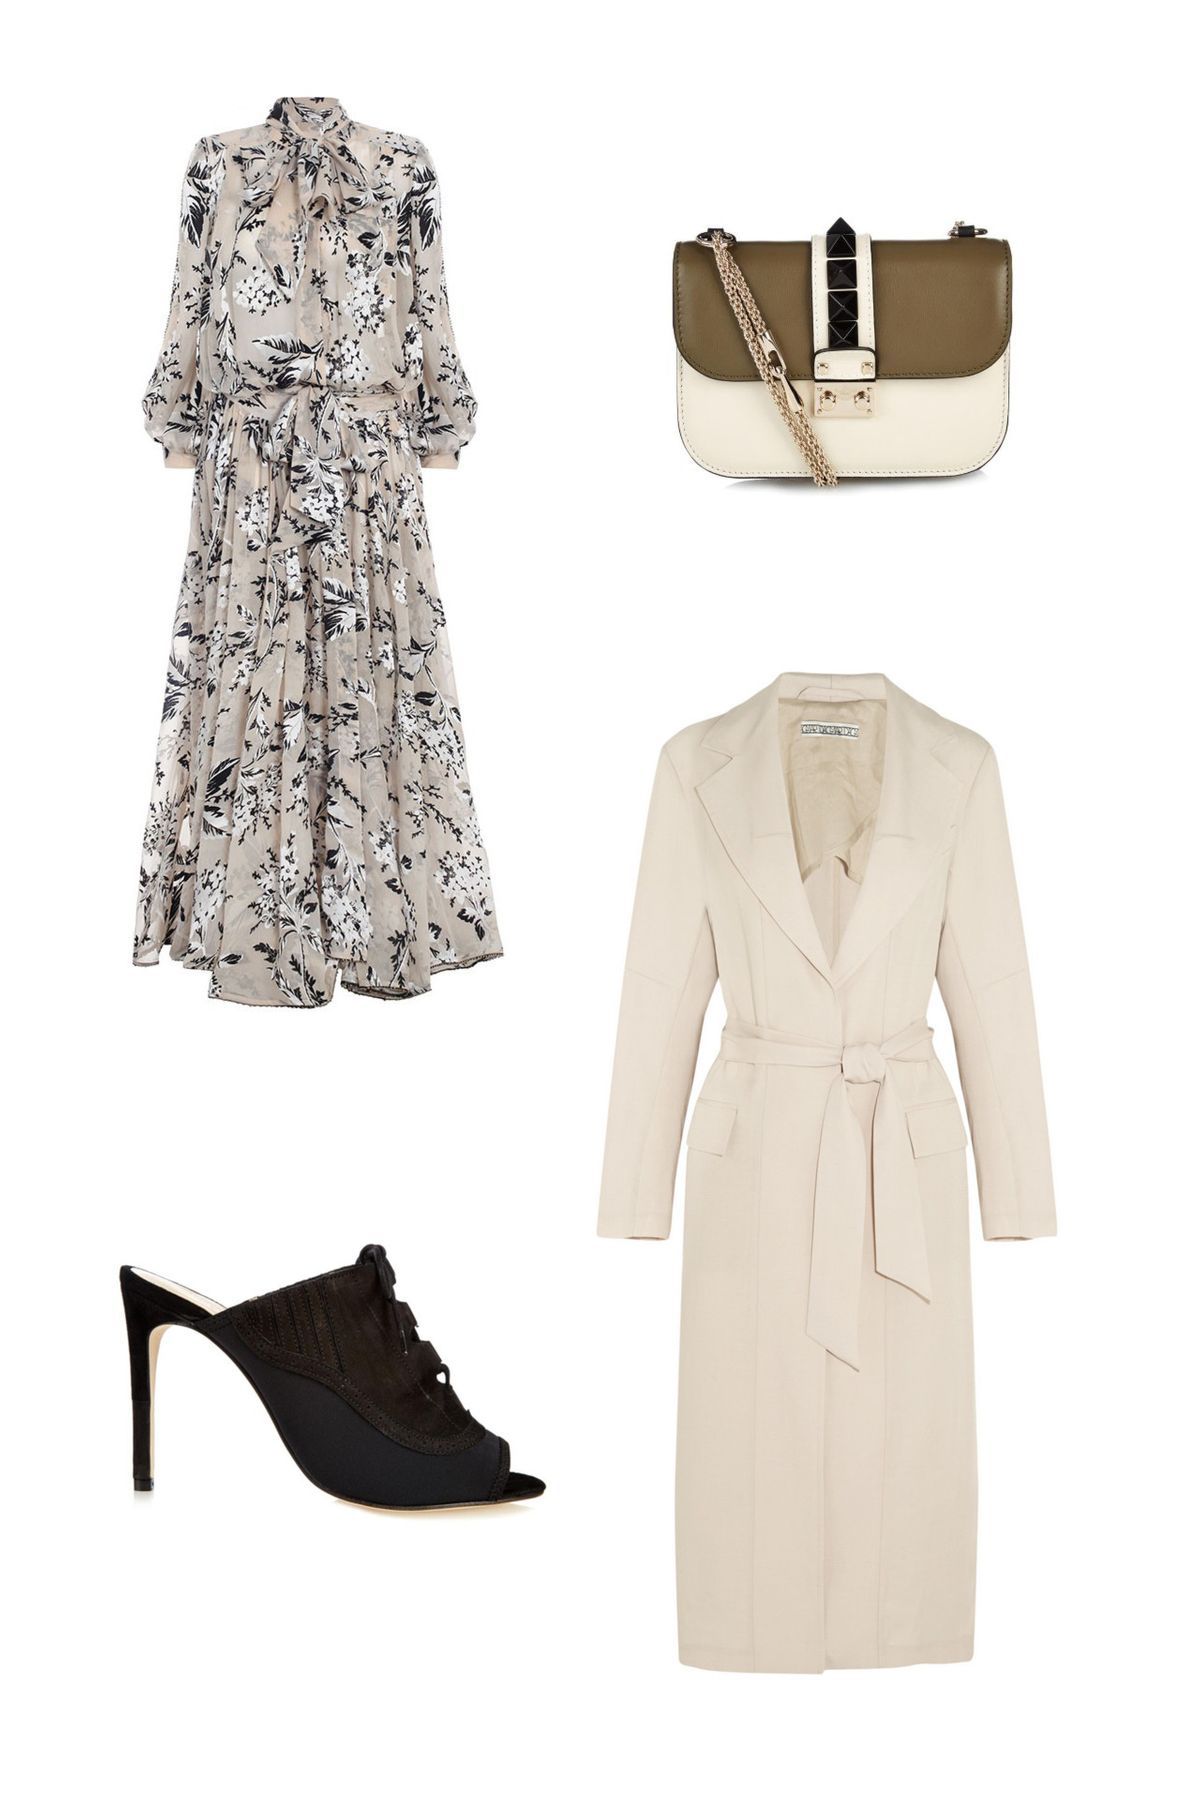 What to wear to a wedding in winter - Vogue Australia